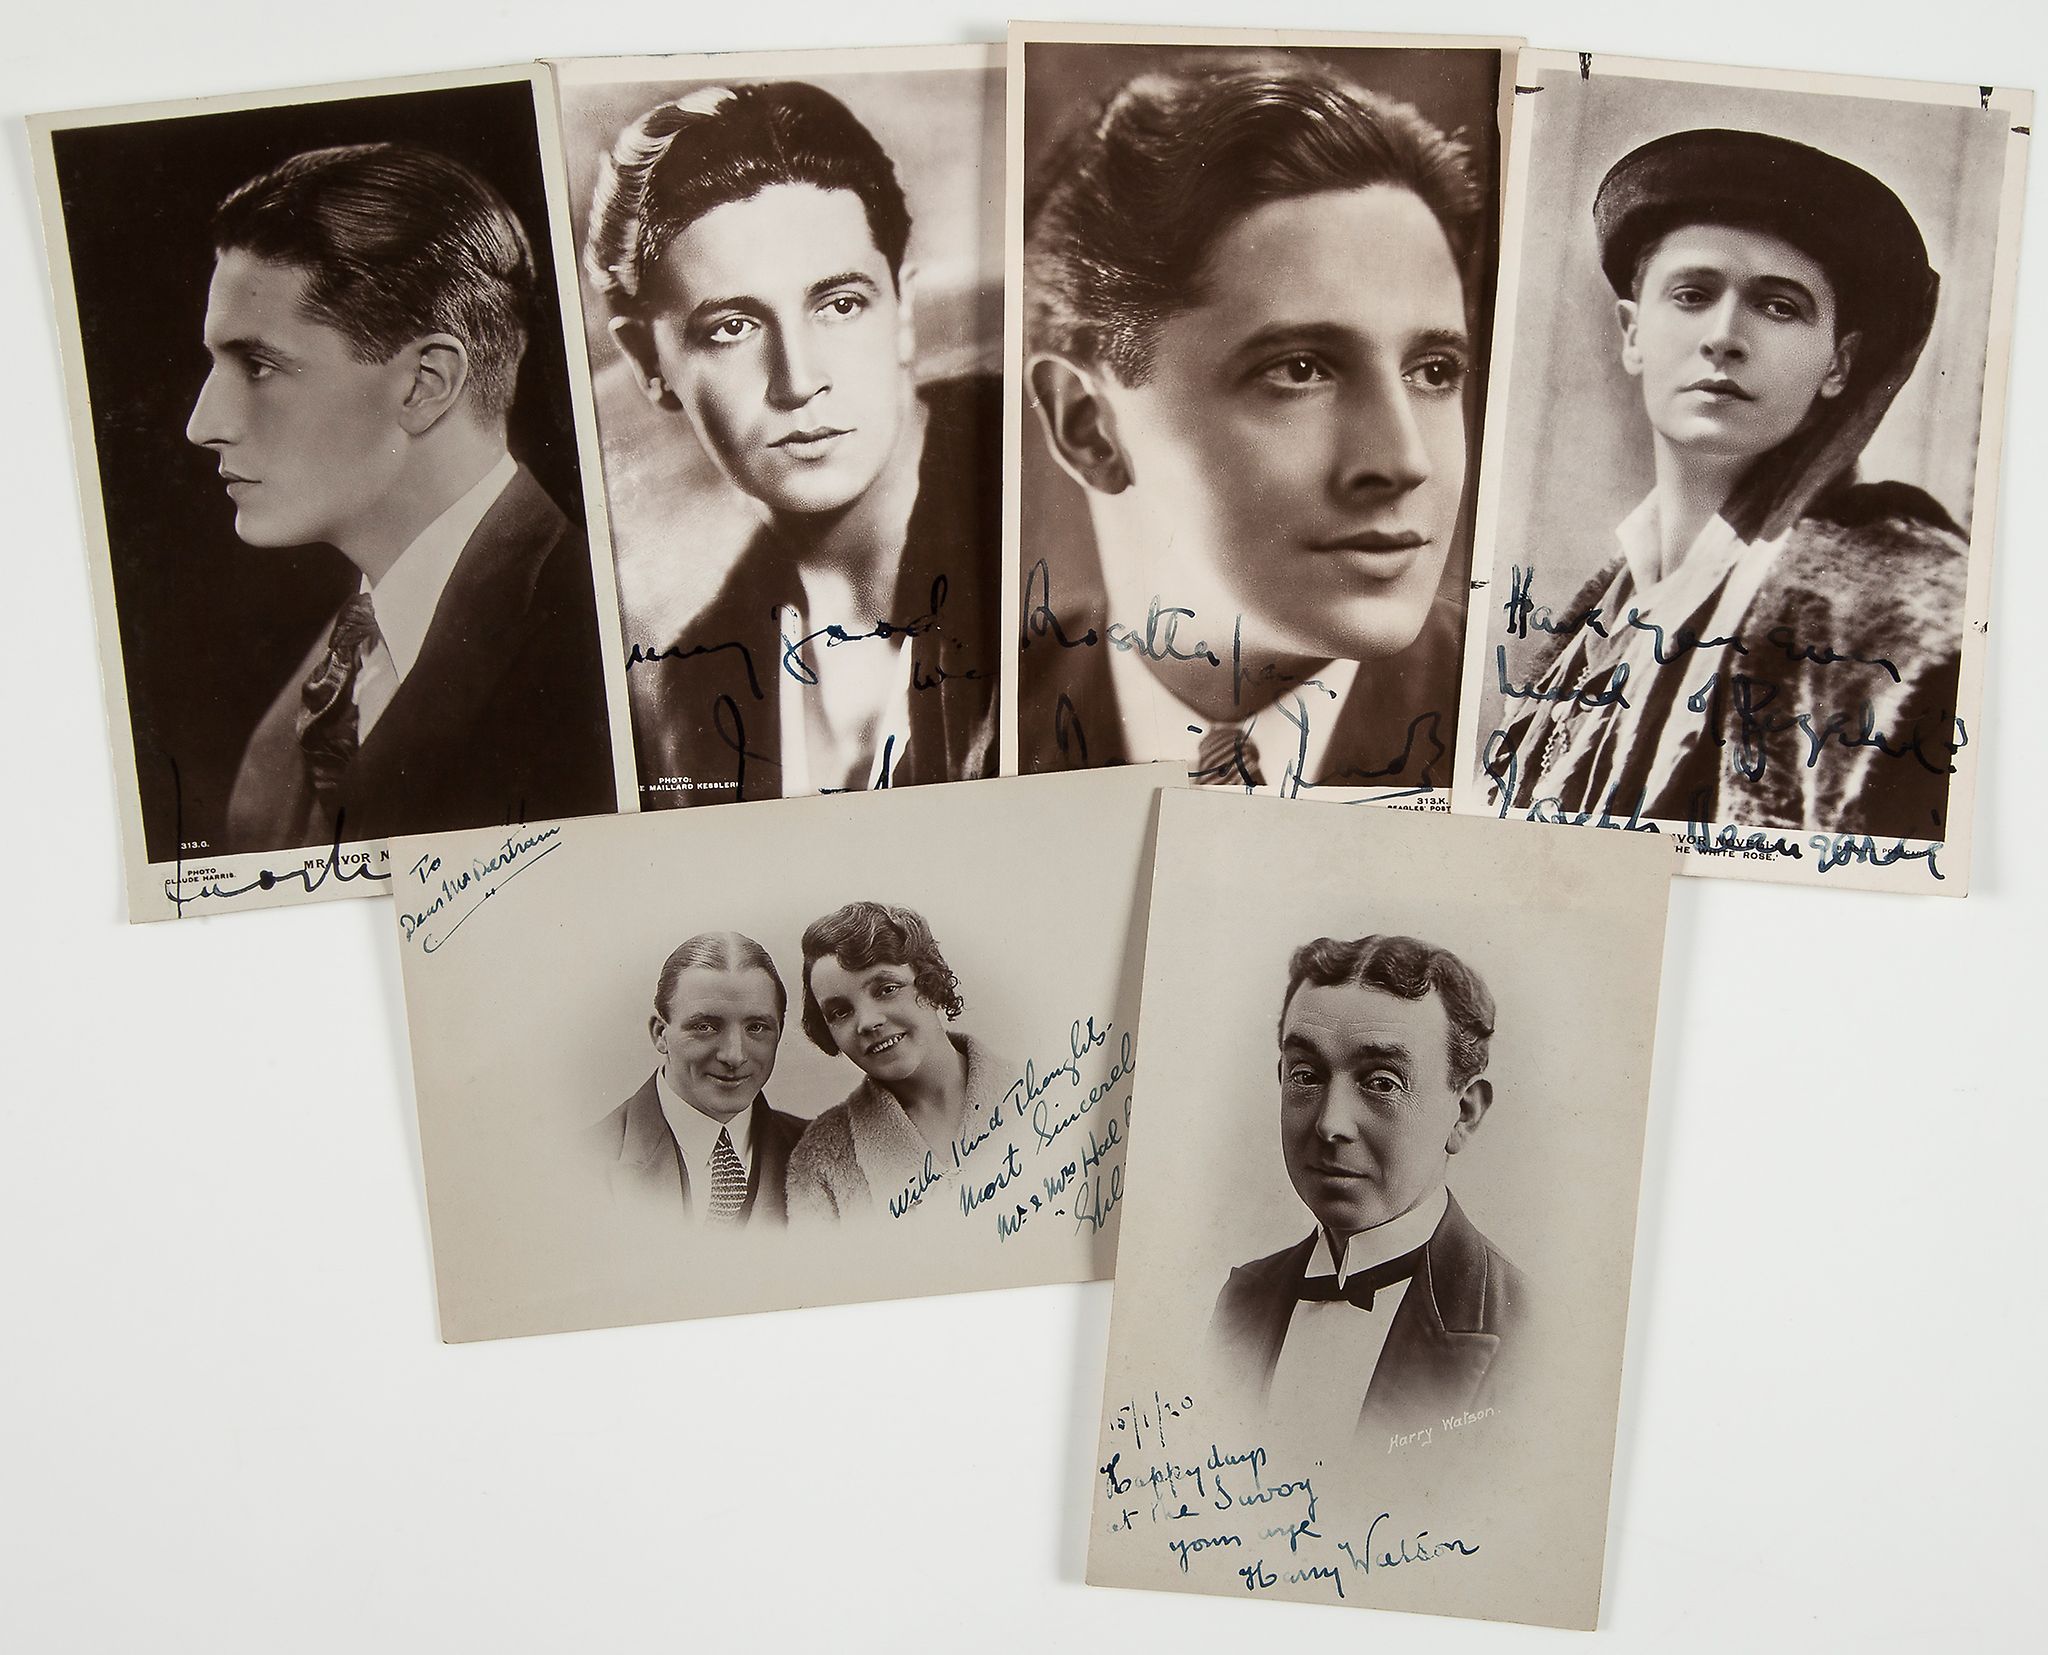 THEATRE COLLECTION - INCL. IVOR NOVELLO - Collection of theatrical photographs, programmes and